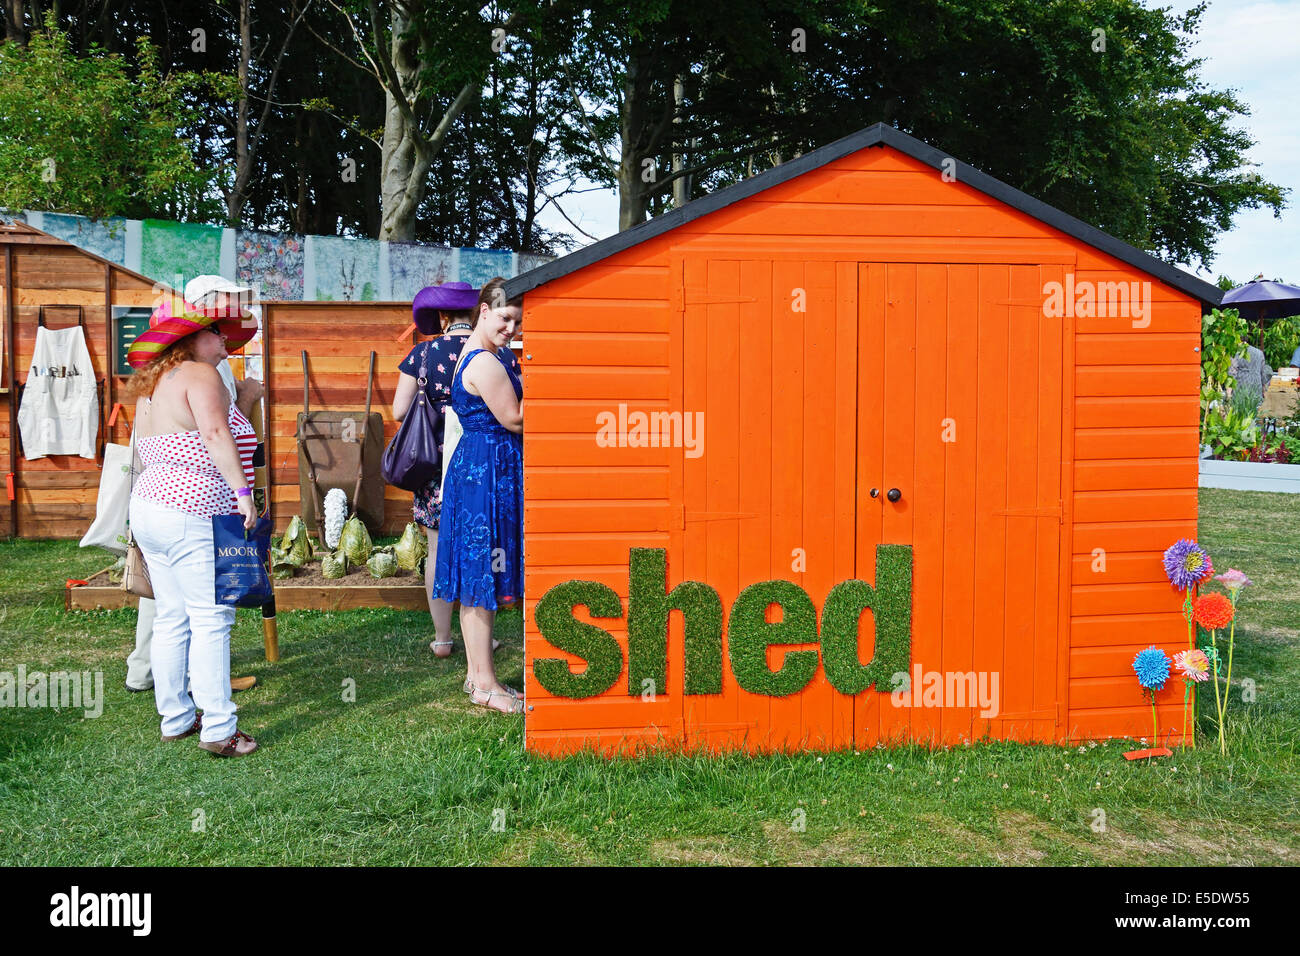 Shed at horticultural show, with onlookers Stock Photo